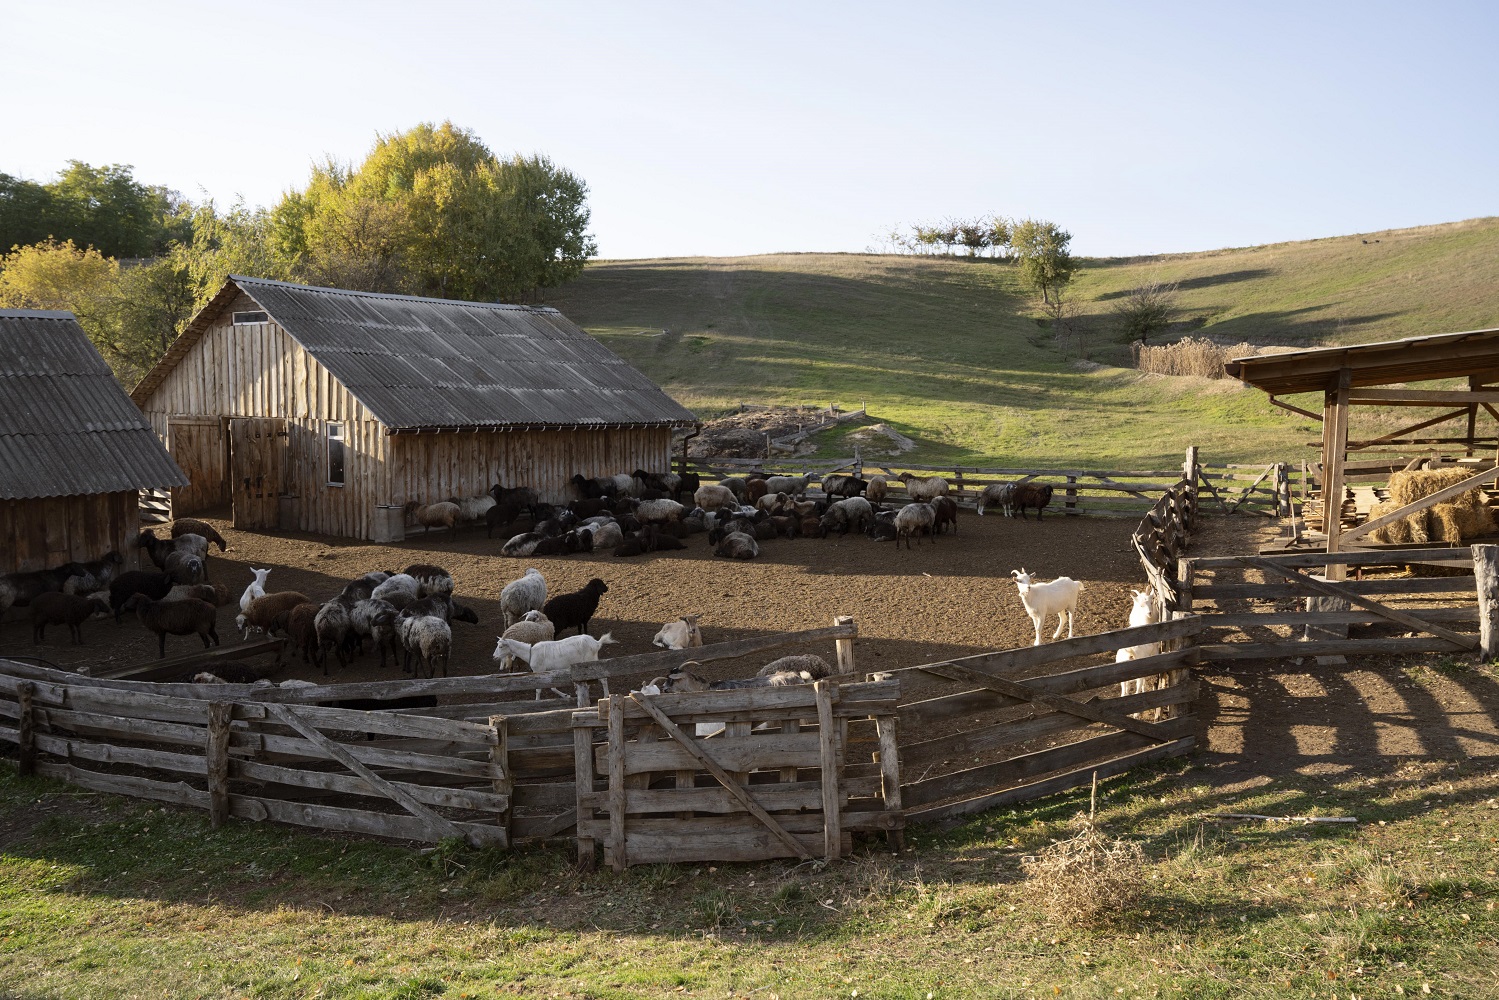 How do dairy farming and public pastures shape food security?